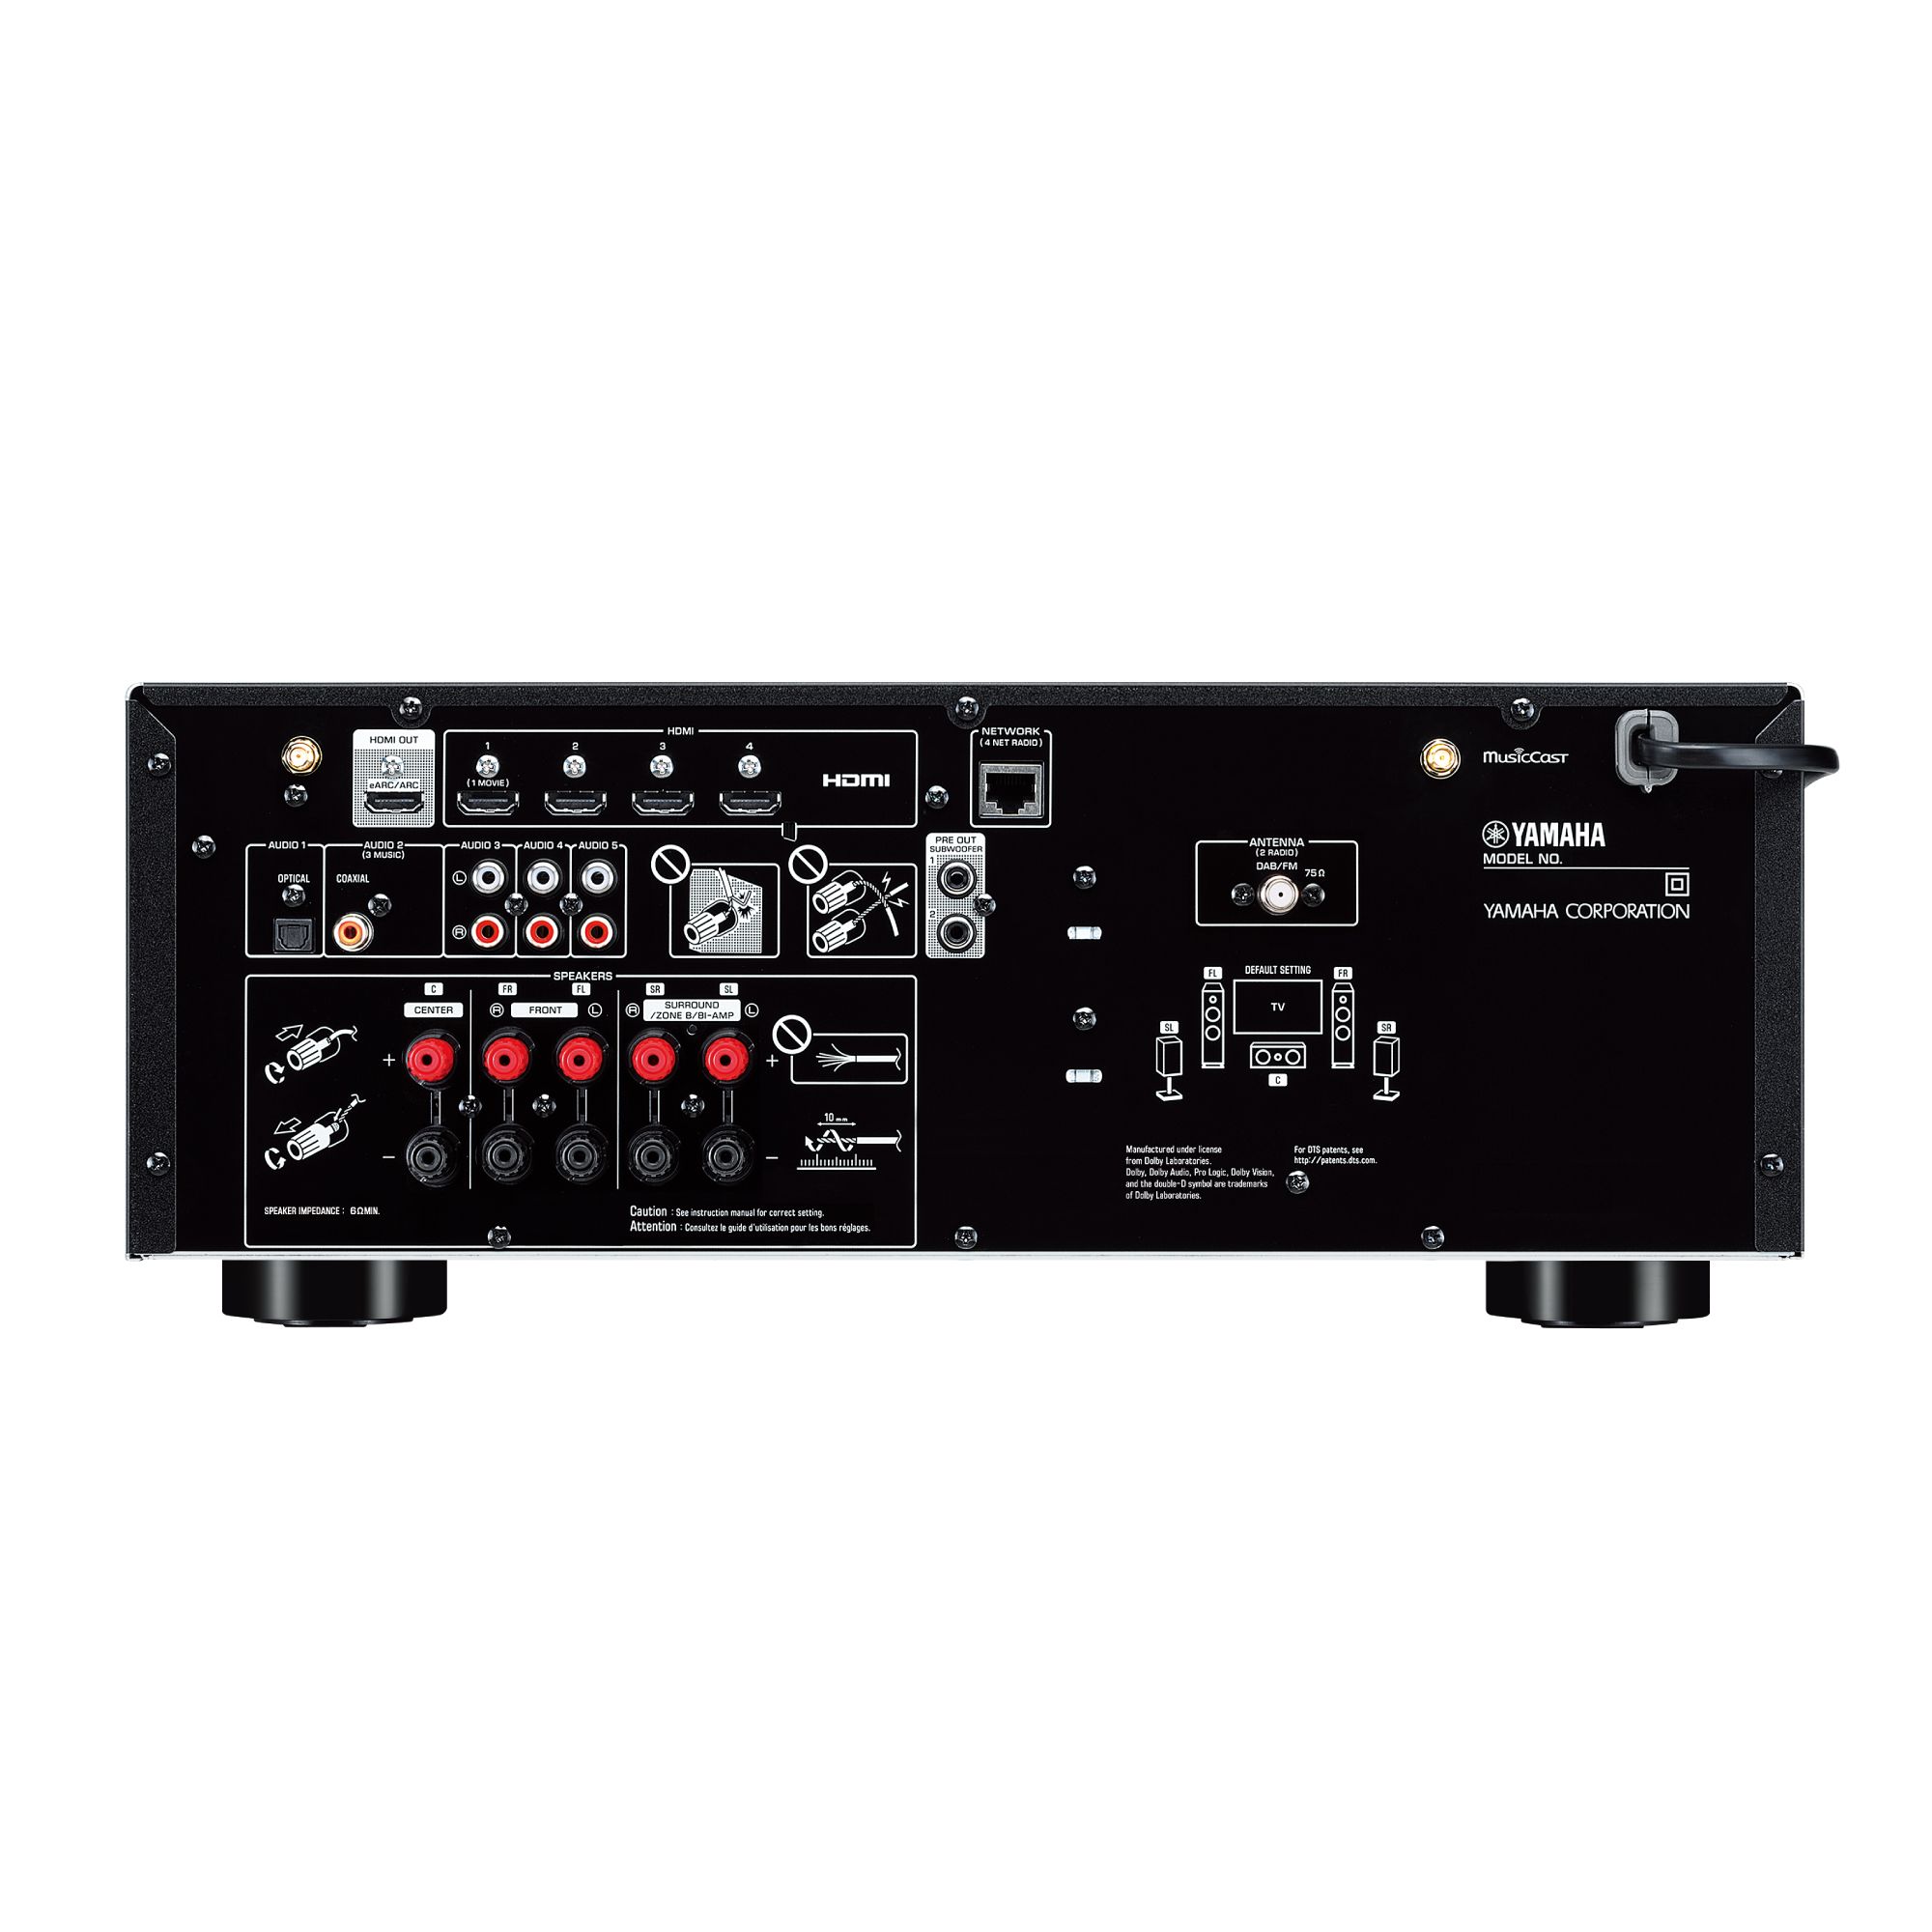 Consignment ratio Thought Yamaha RXV4A 5.1 Channel AV Receiver with Cinema Dsp 3D, wireless s